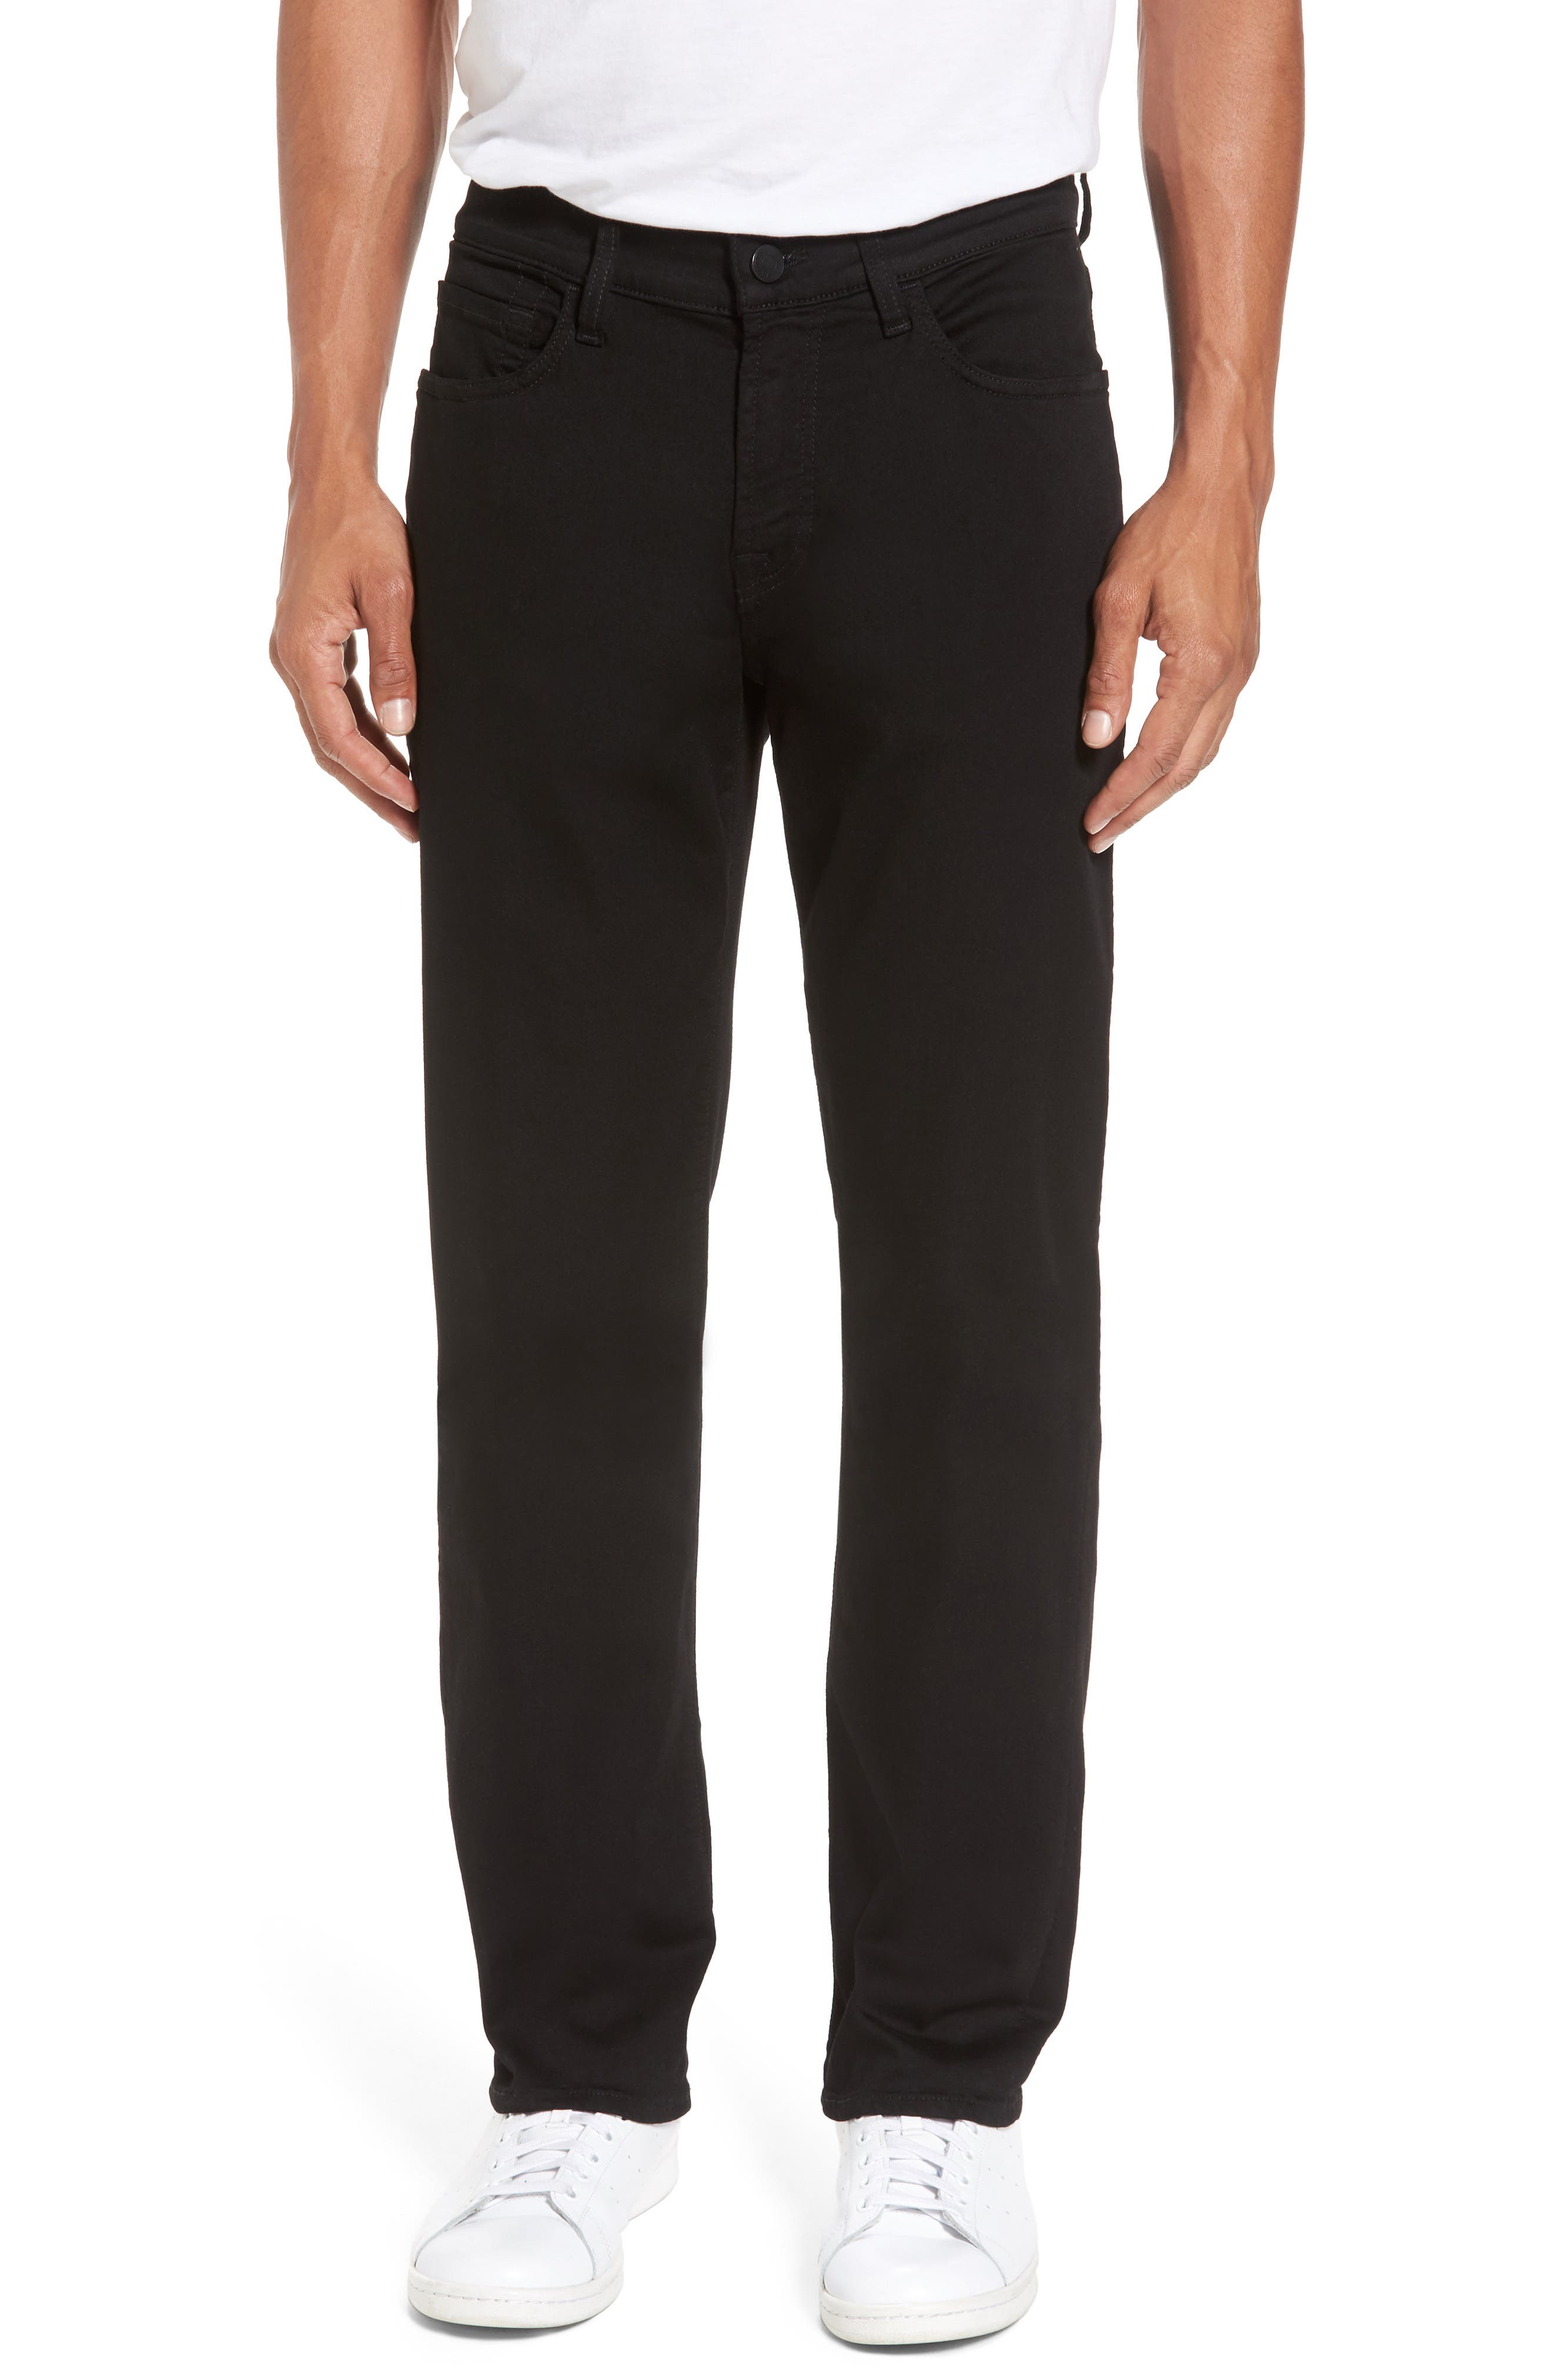 7 for all mankind slimmy luxe sport